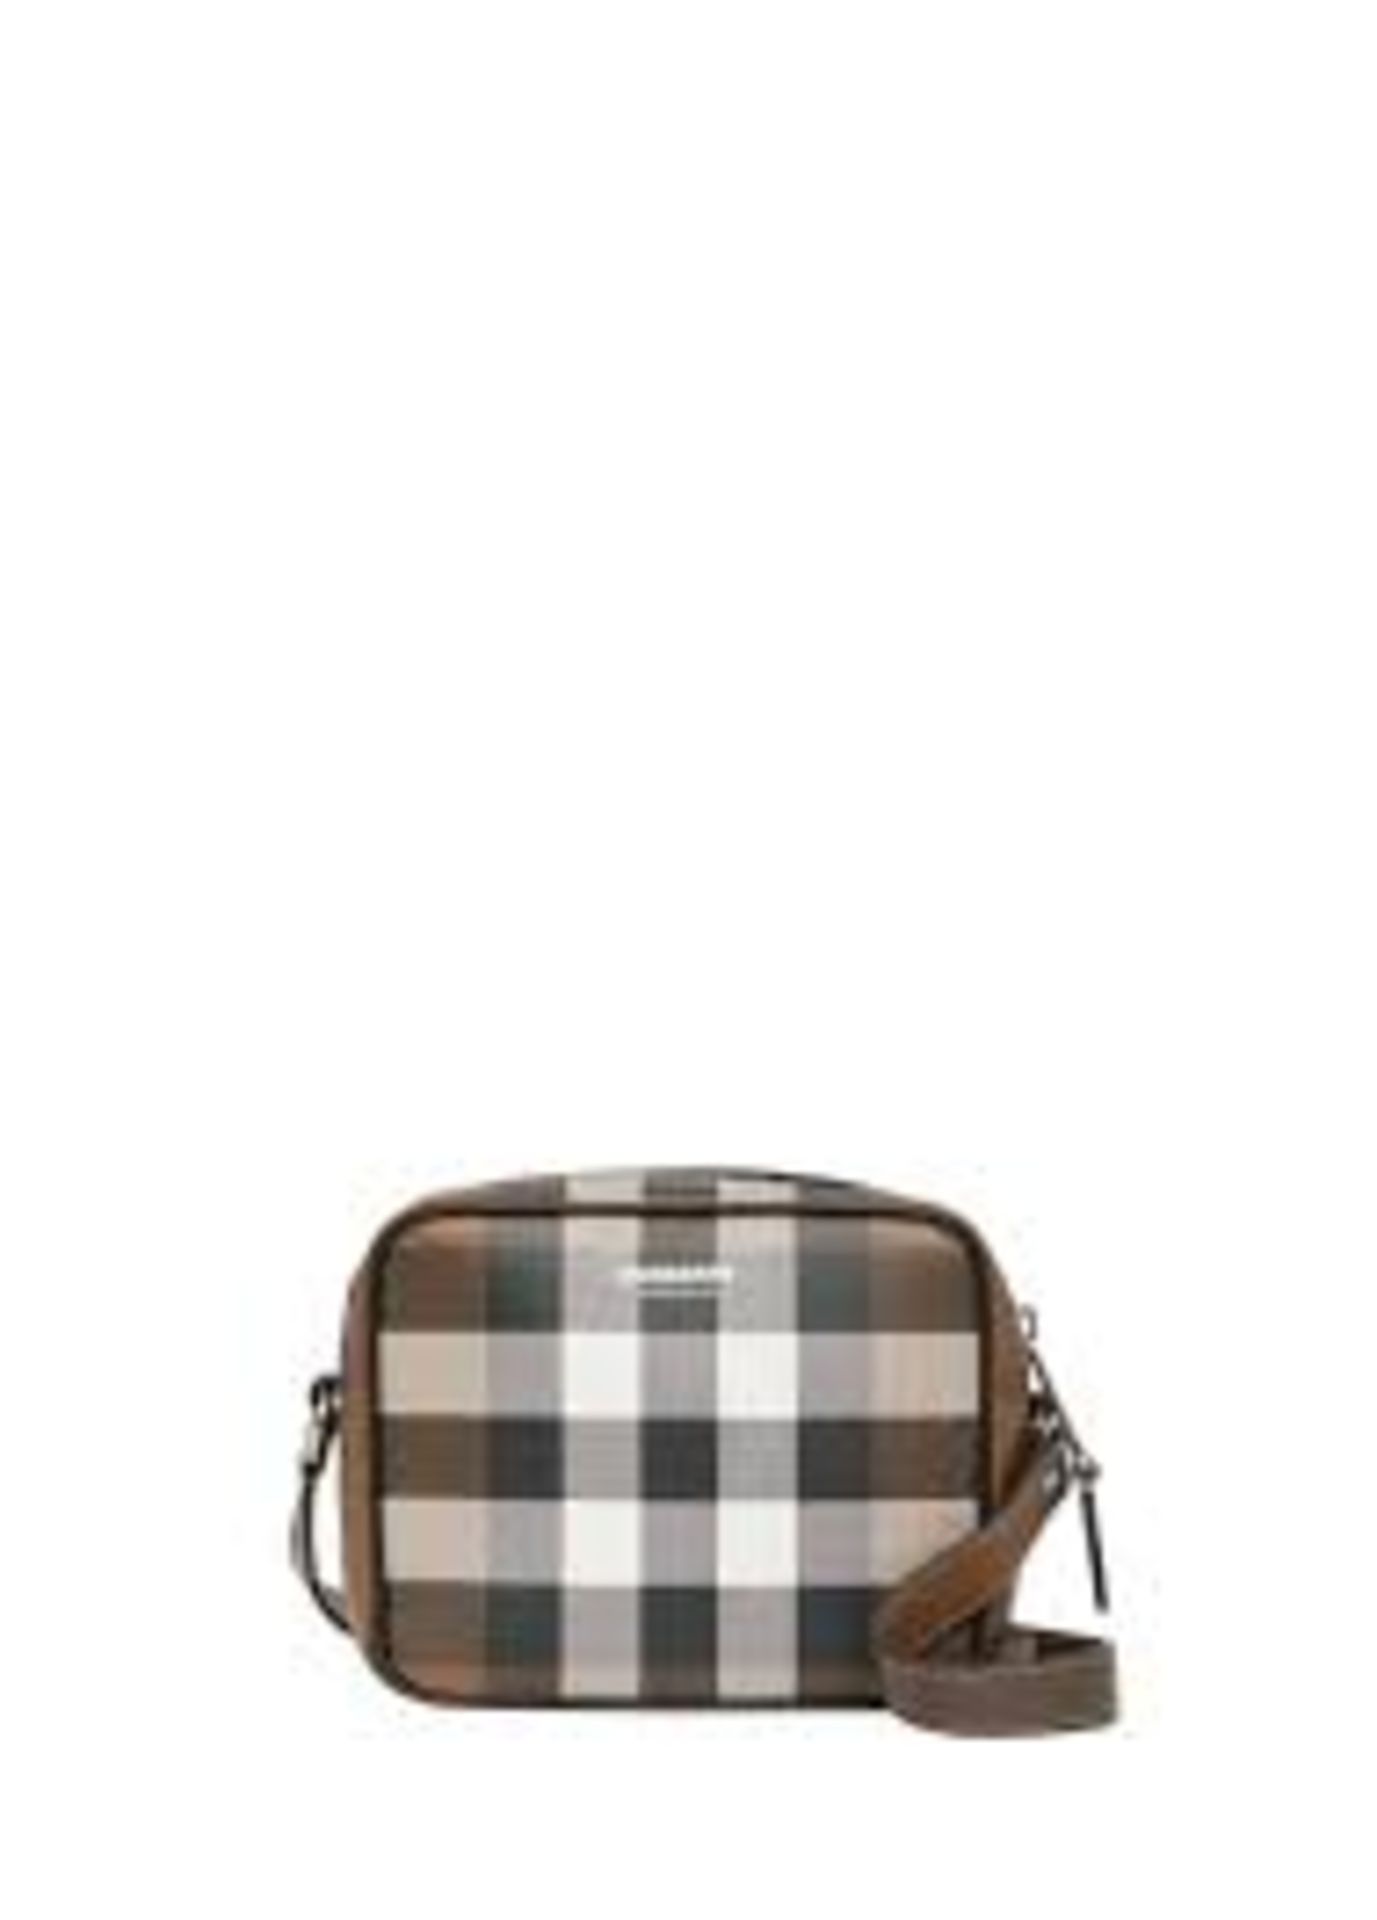 Burberry Shoulder Bag Check Coated Canvas Brown. 16x13cm. (14.21)